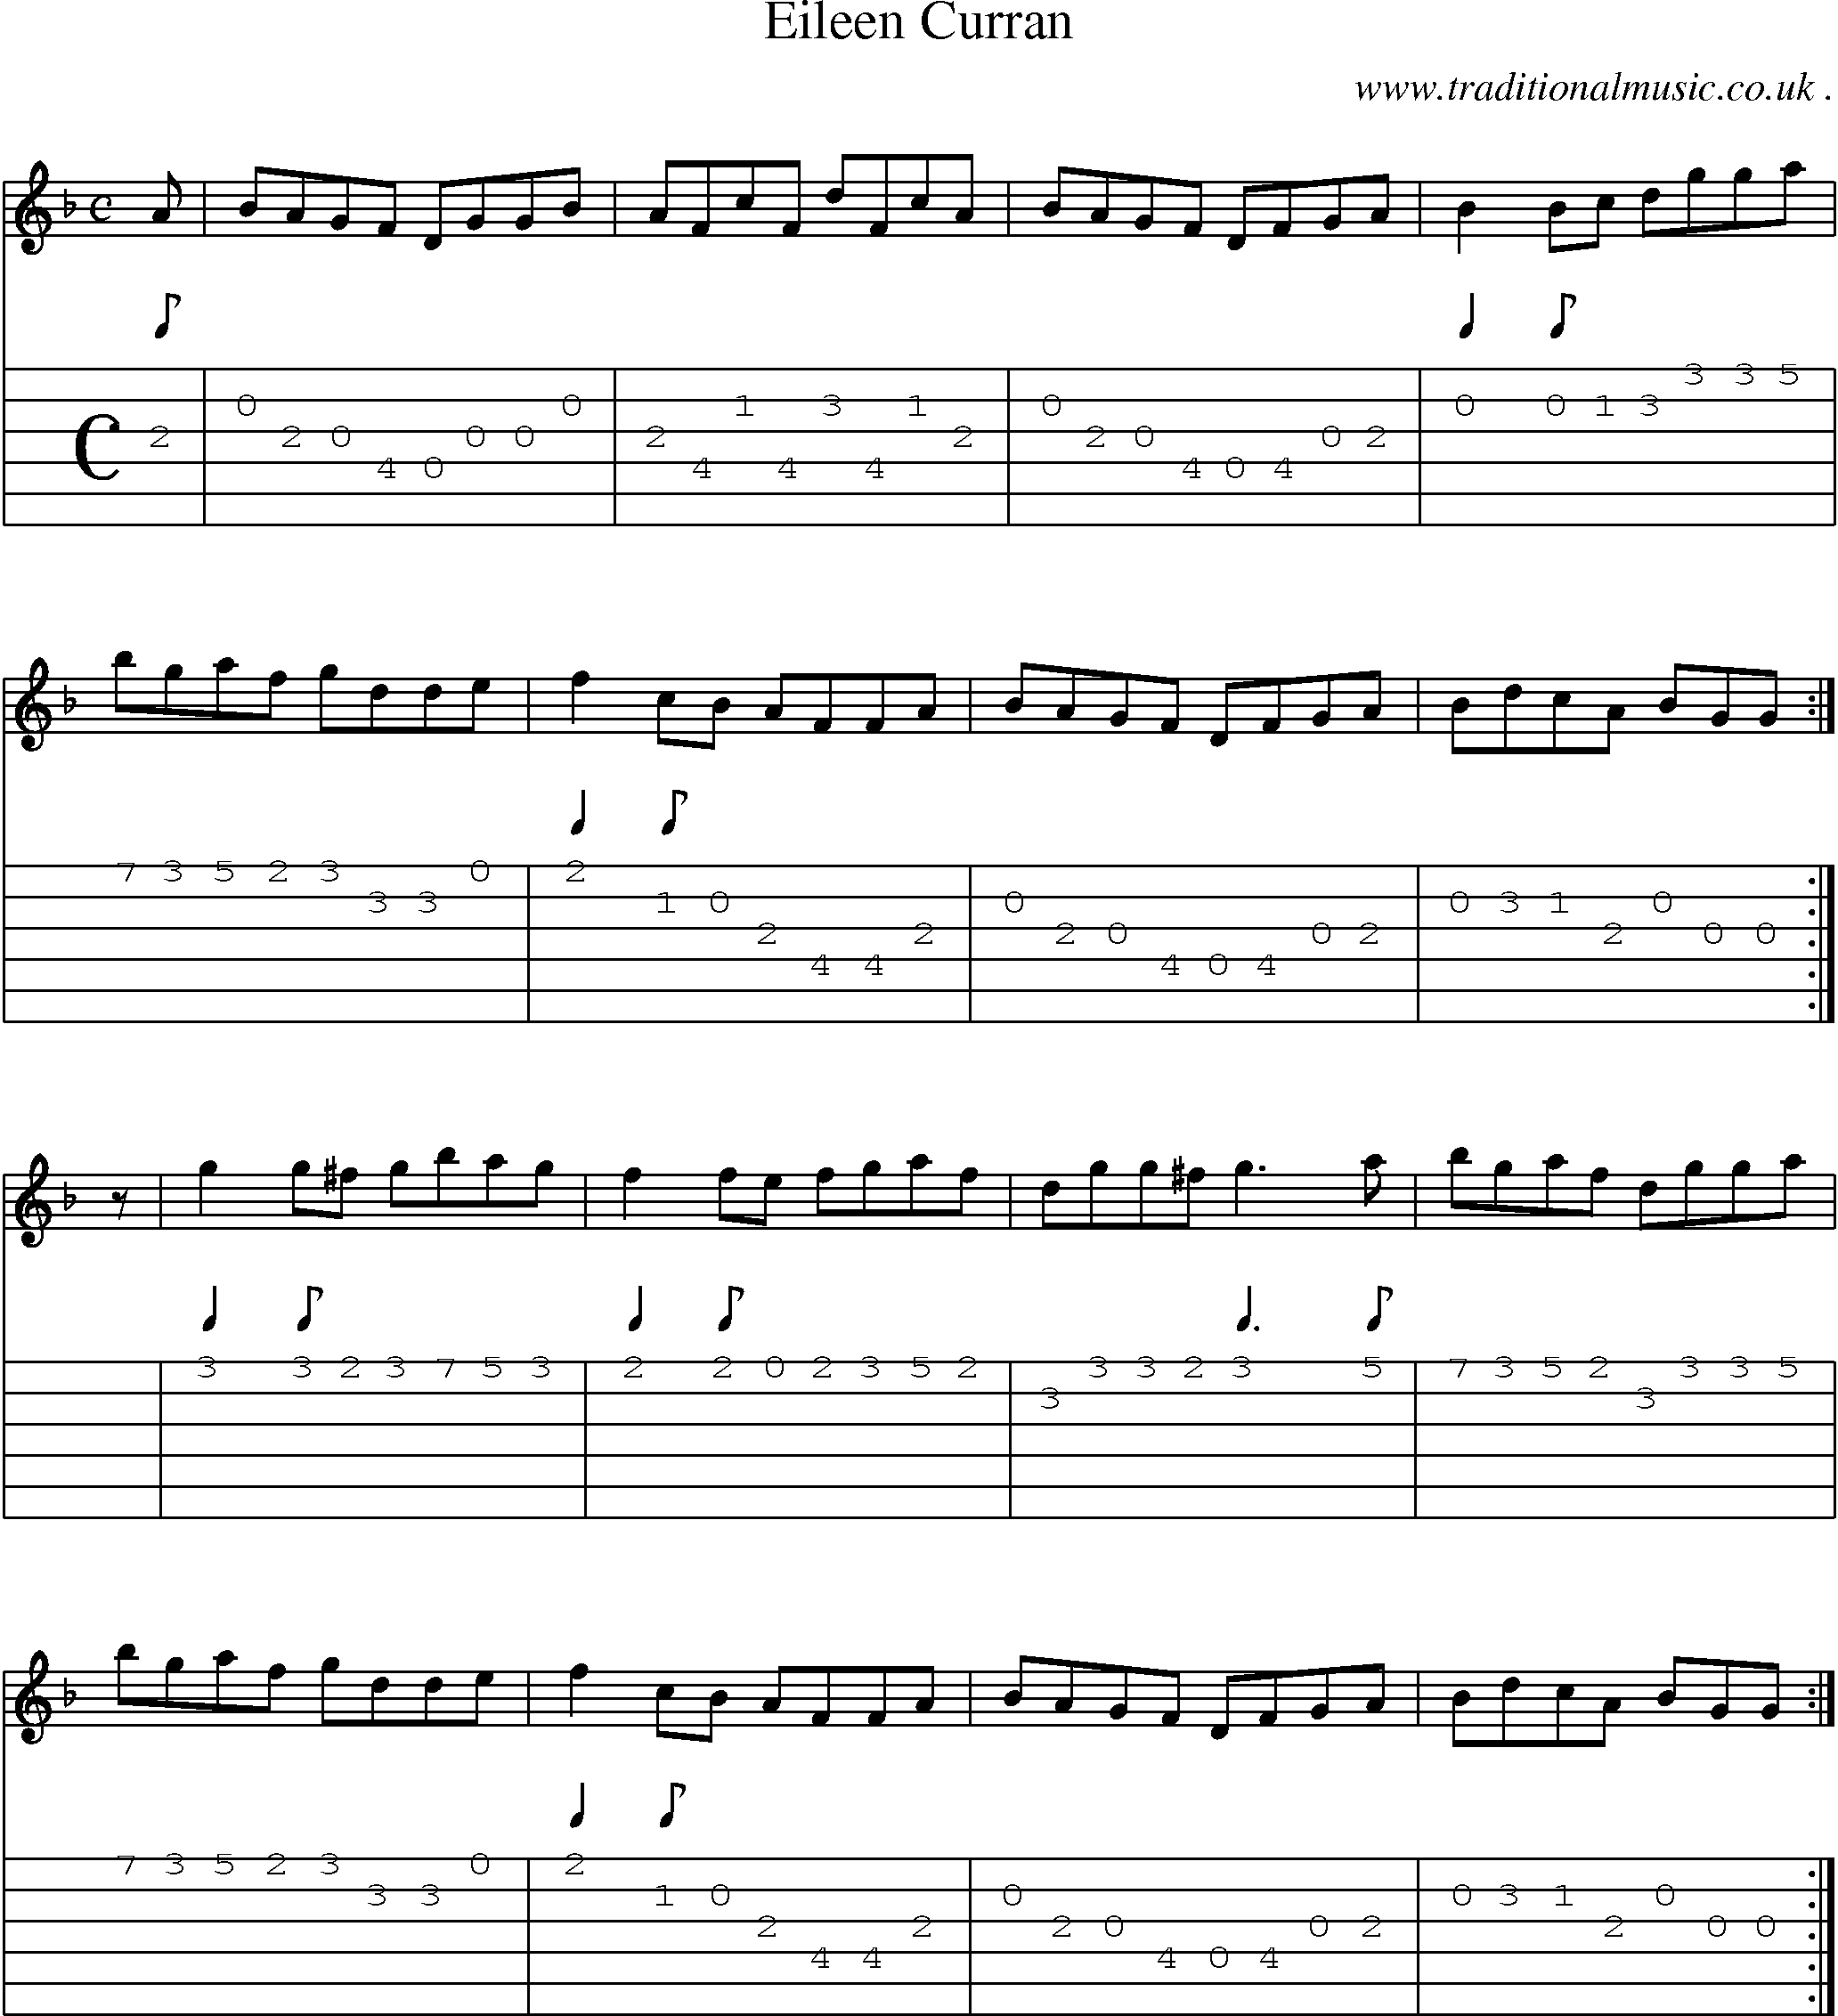 Sheet-Music and Guitar Tabs for Eileen Curran